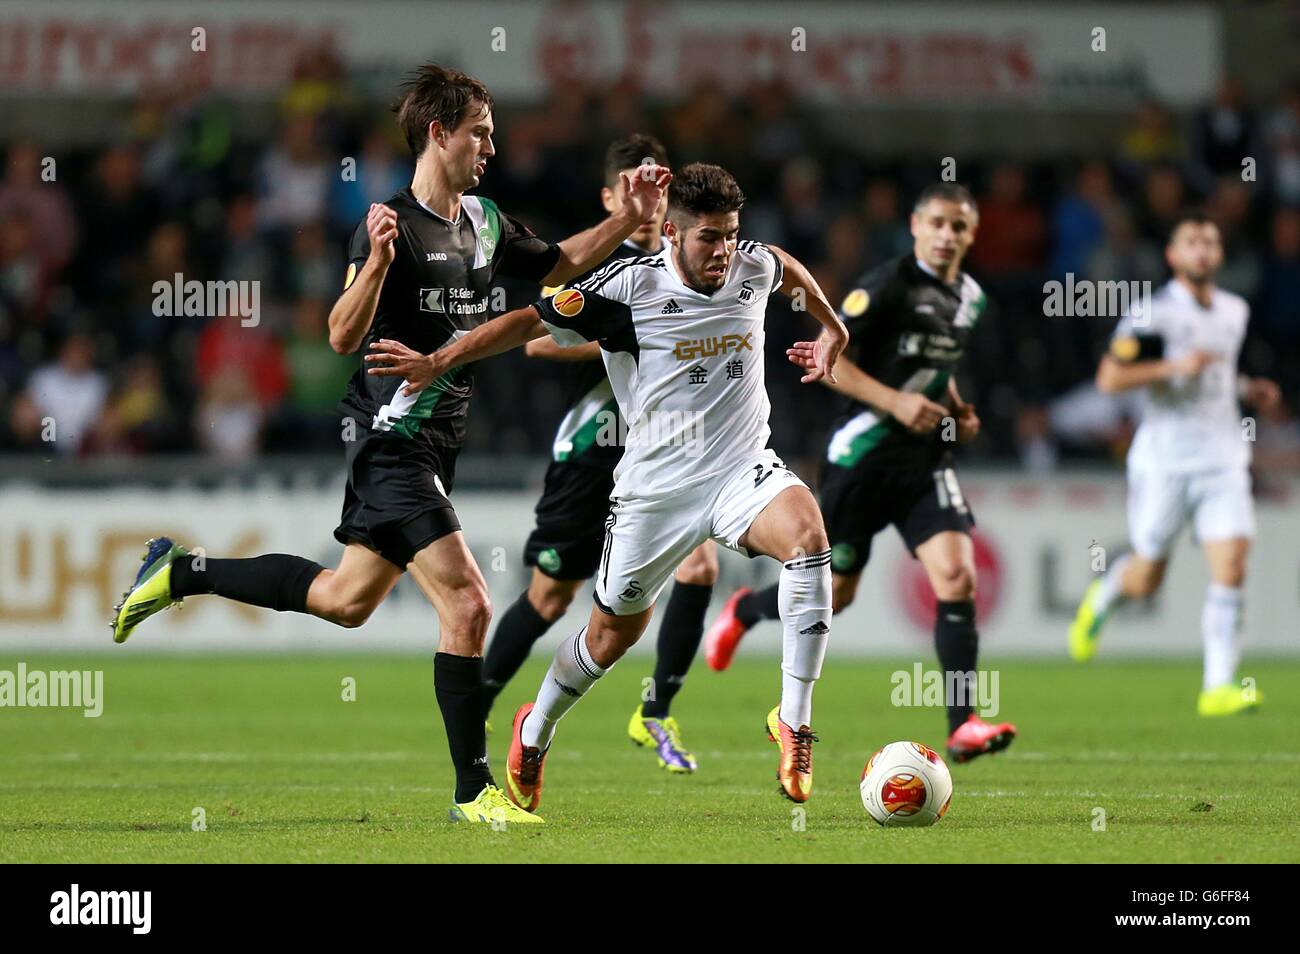 Football - UEFA Europa League - Groupe A - Swansea City v St Gallen - stade Liberty Banque D'Images